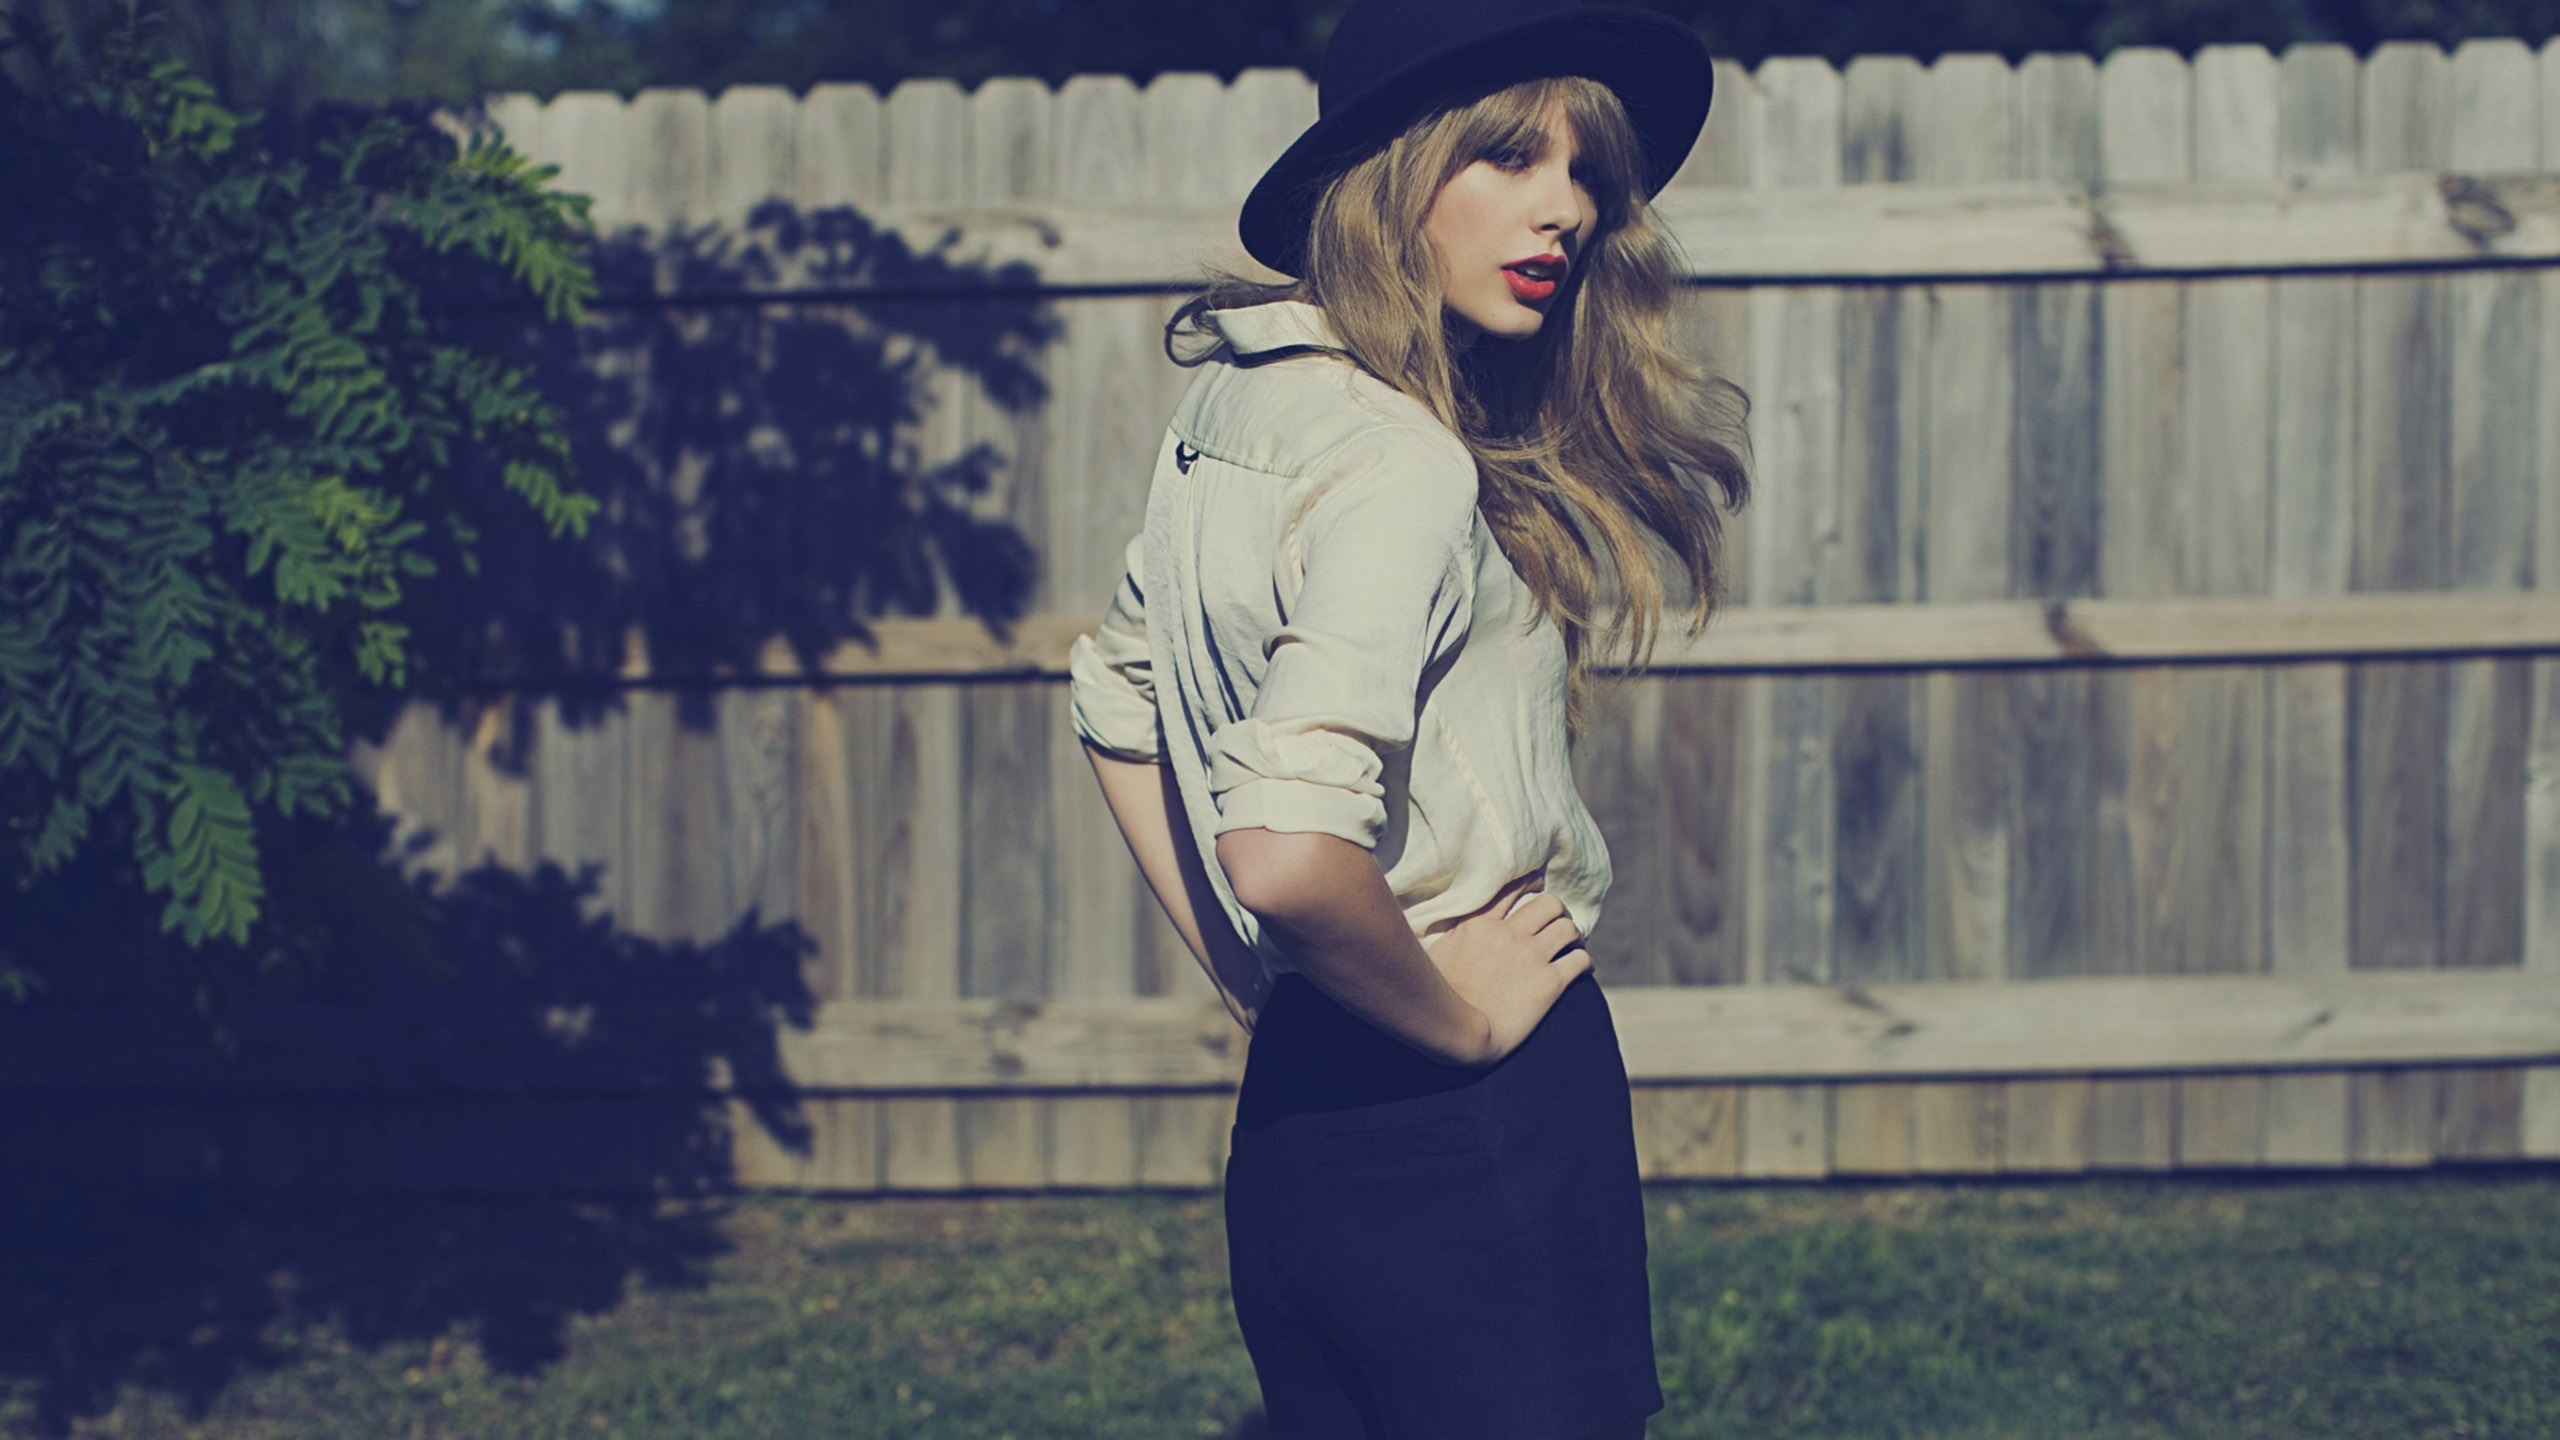 Taylor Swift Pose for 2560x1440 HDTV resolution